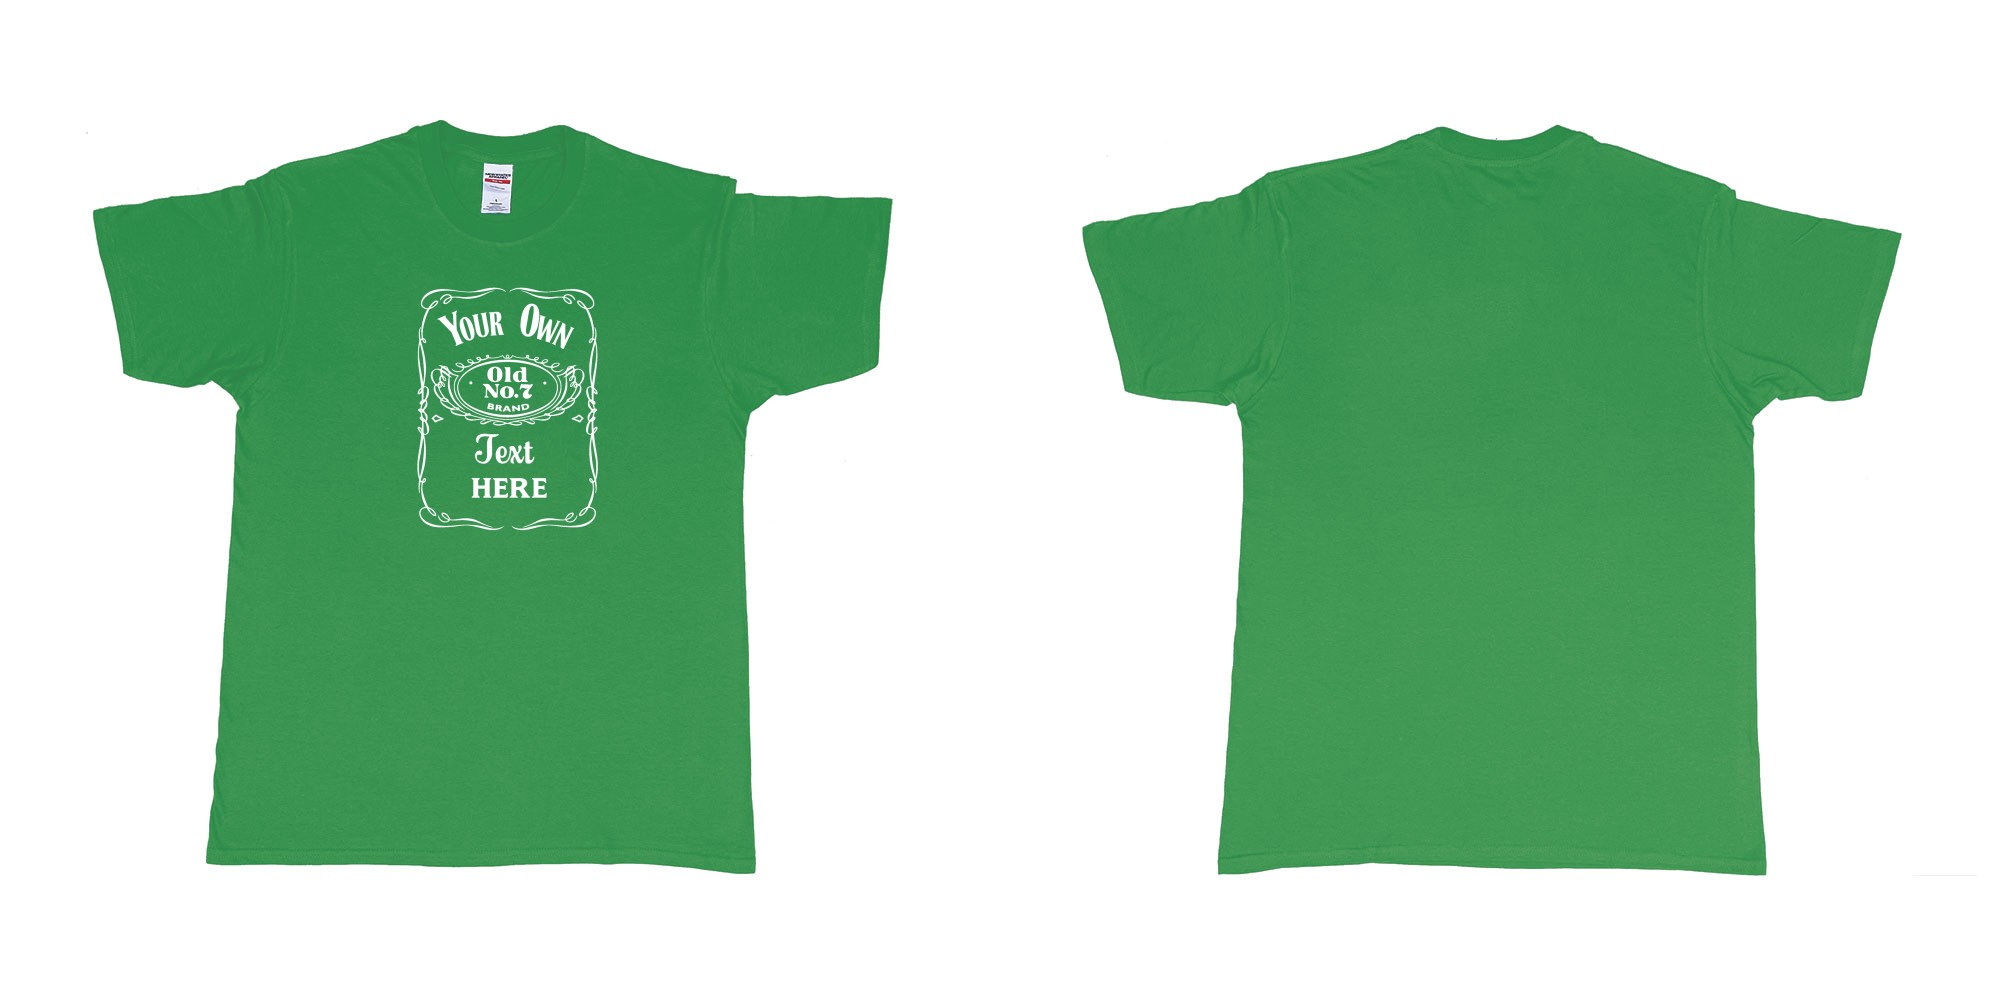 Custom tshirt design Jack Daniels Label in fabric color irish-green choice your own text made in Bali by The Pirate Way